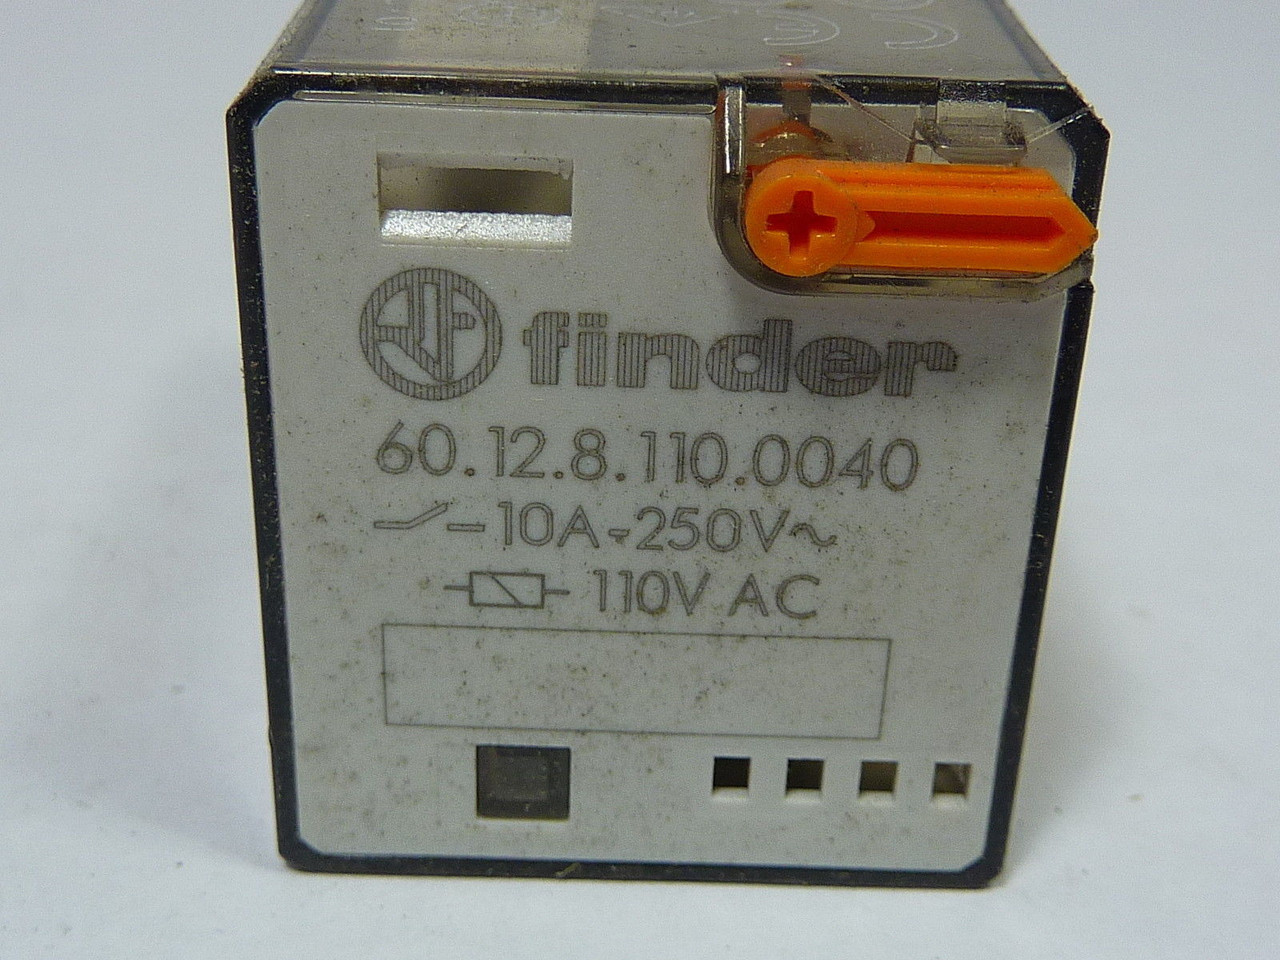 Finder 60.12.8.110.0040 General Purpose Relay 110VAC 10A USED